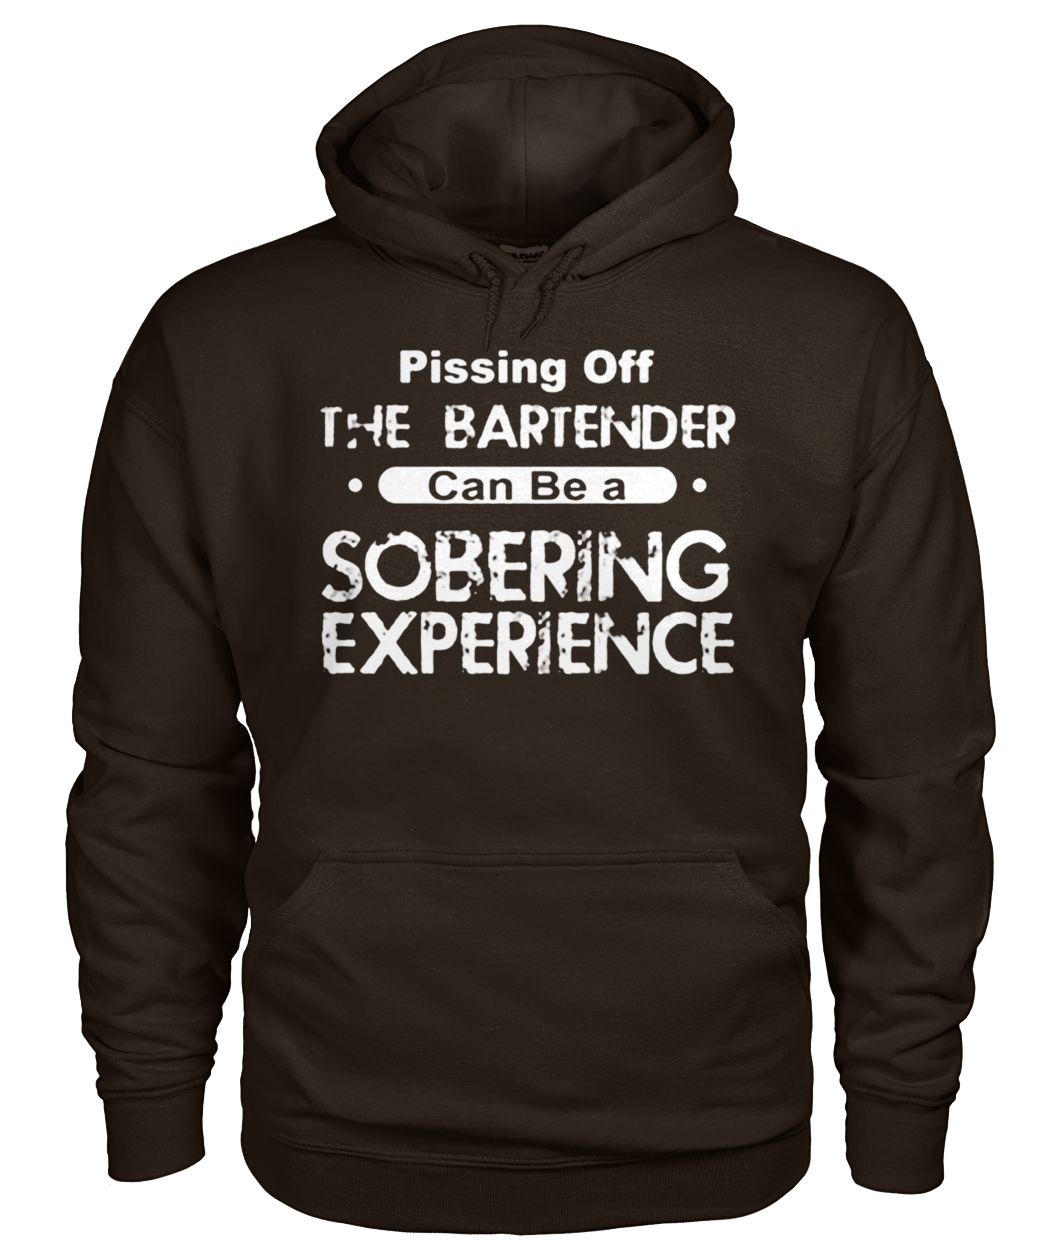 Pissing off the bartender can be a soberring experience gildan hoodie